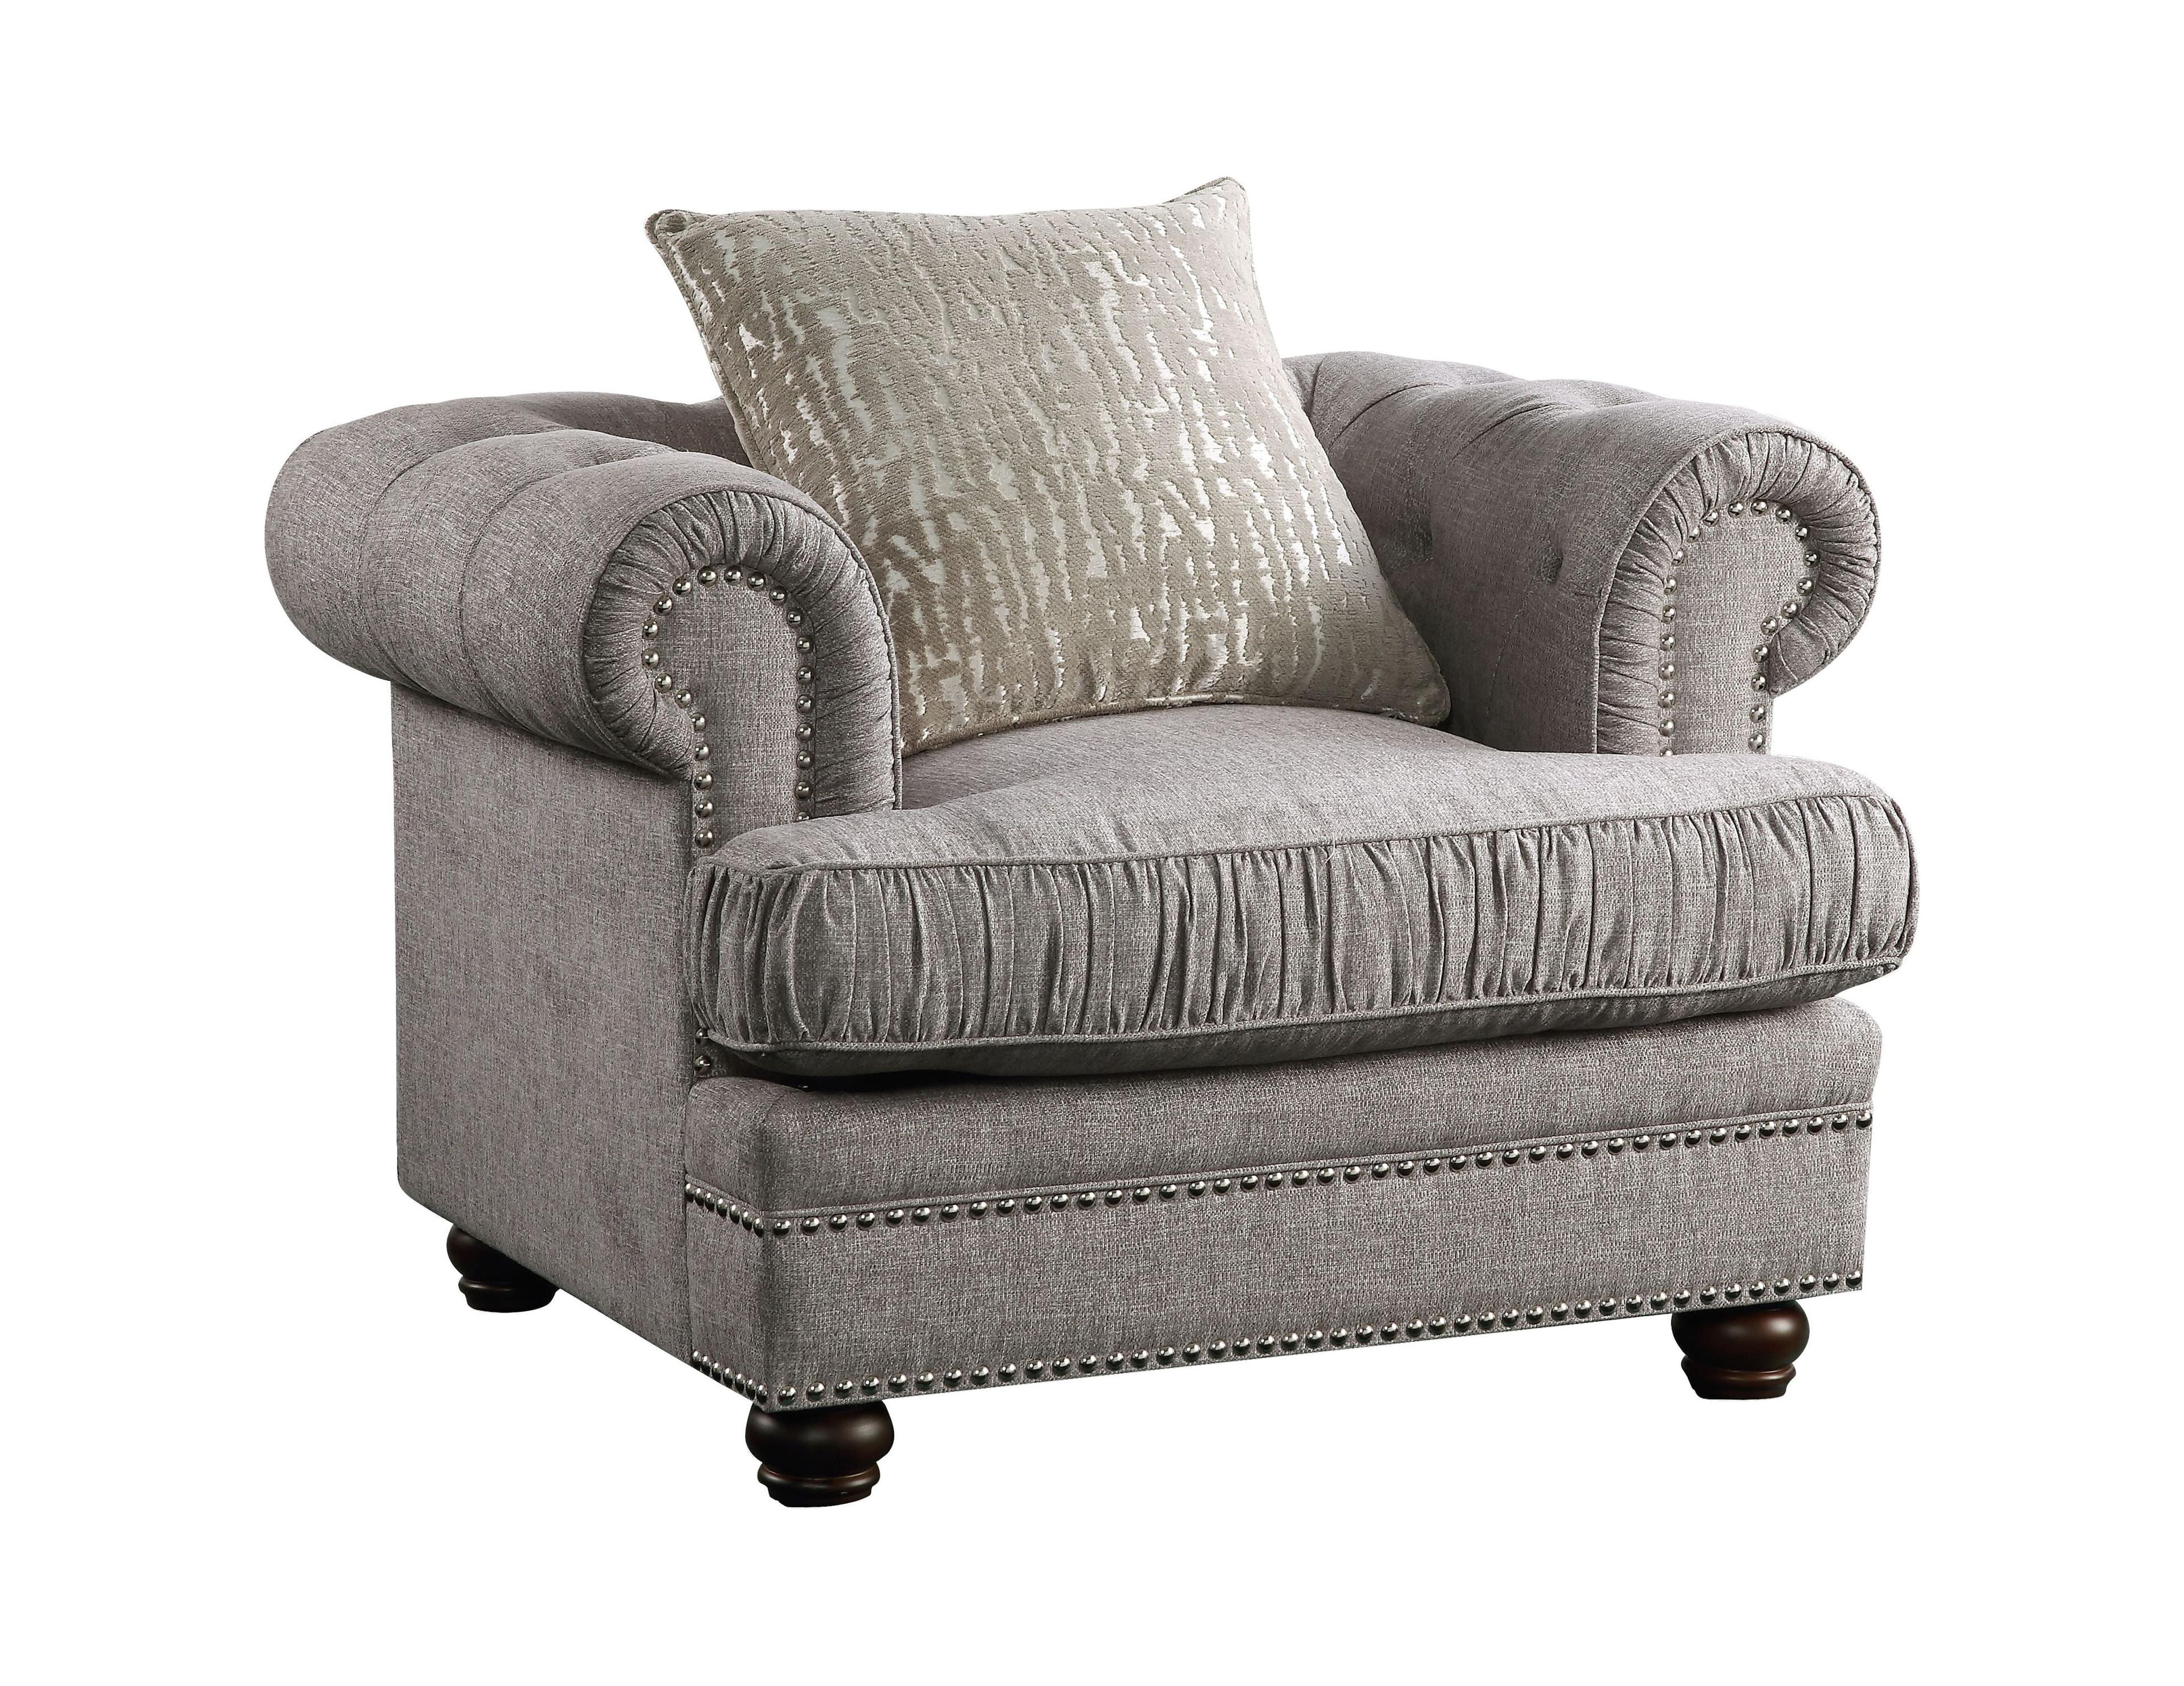 Elegant Gray Fabric Chair with Nail-Head Trim and Rolled Arms